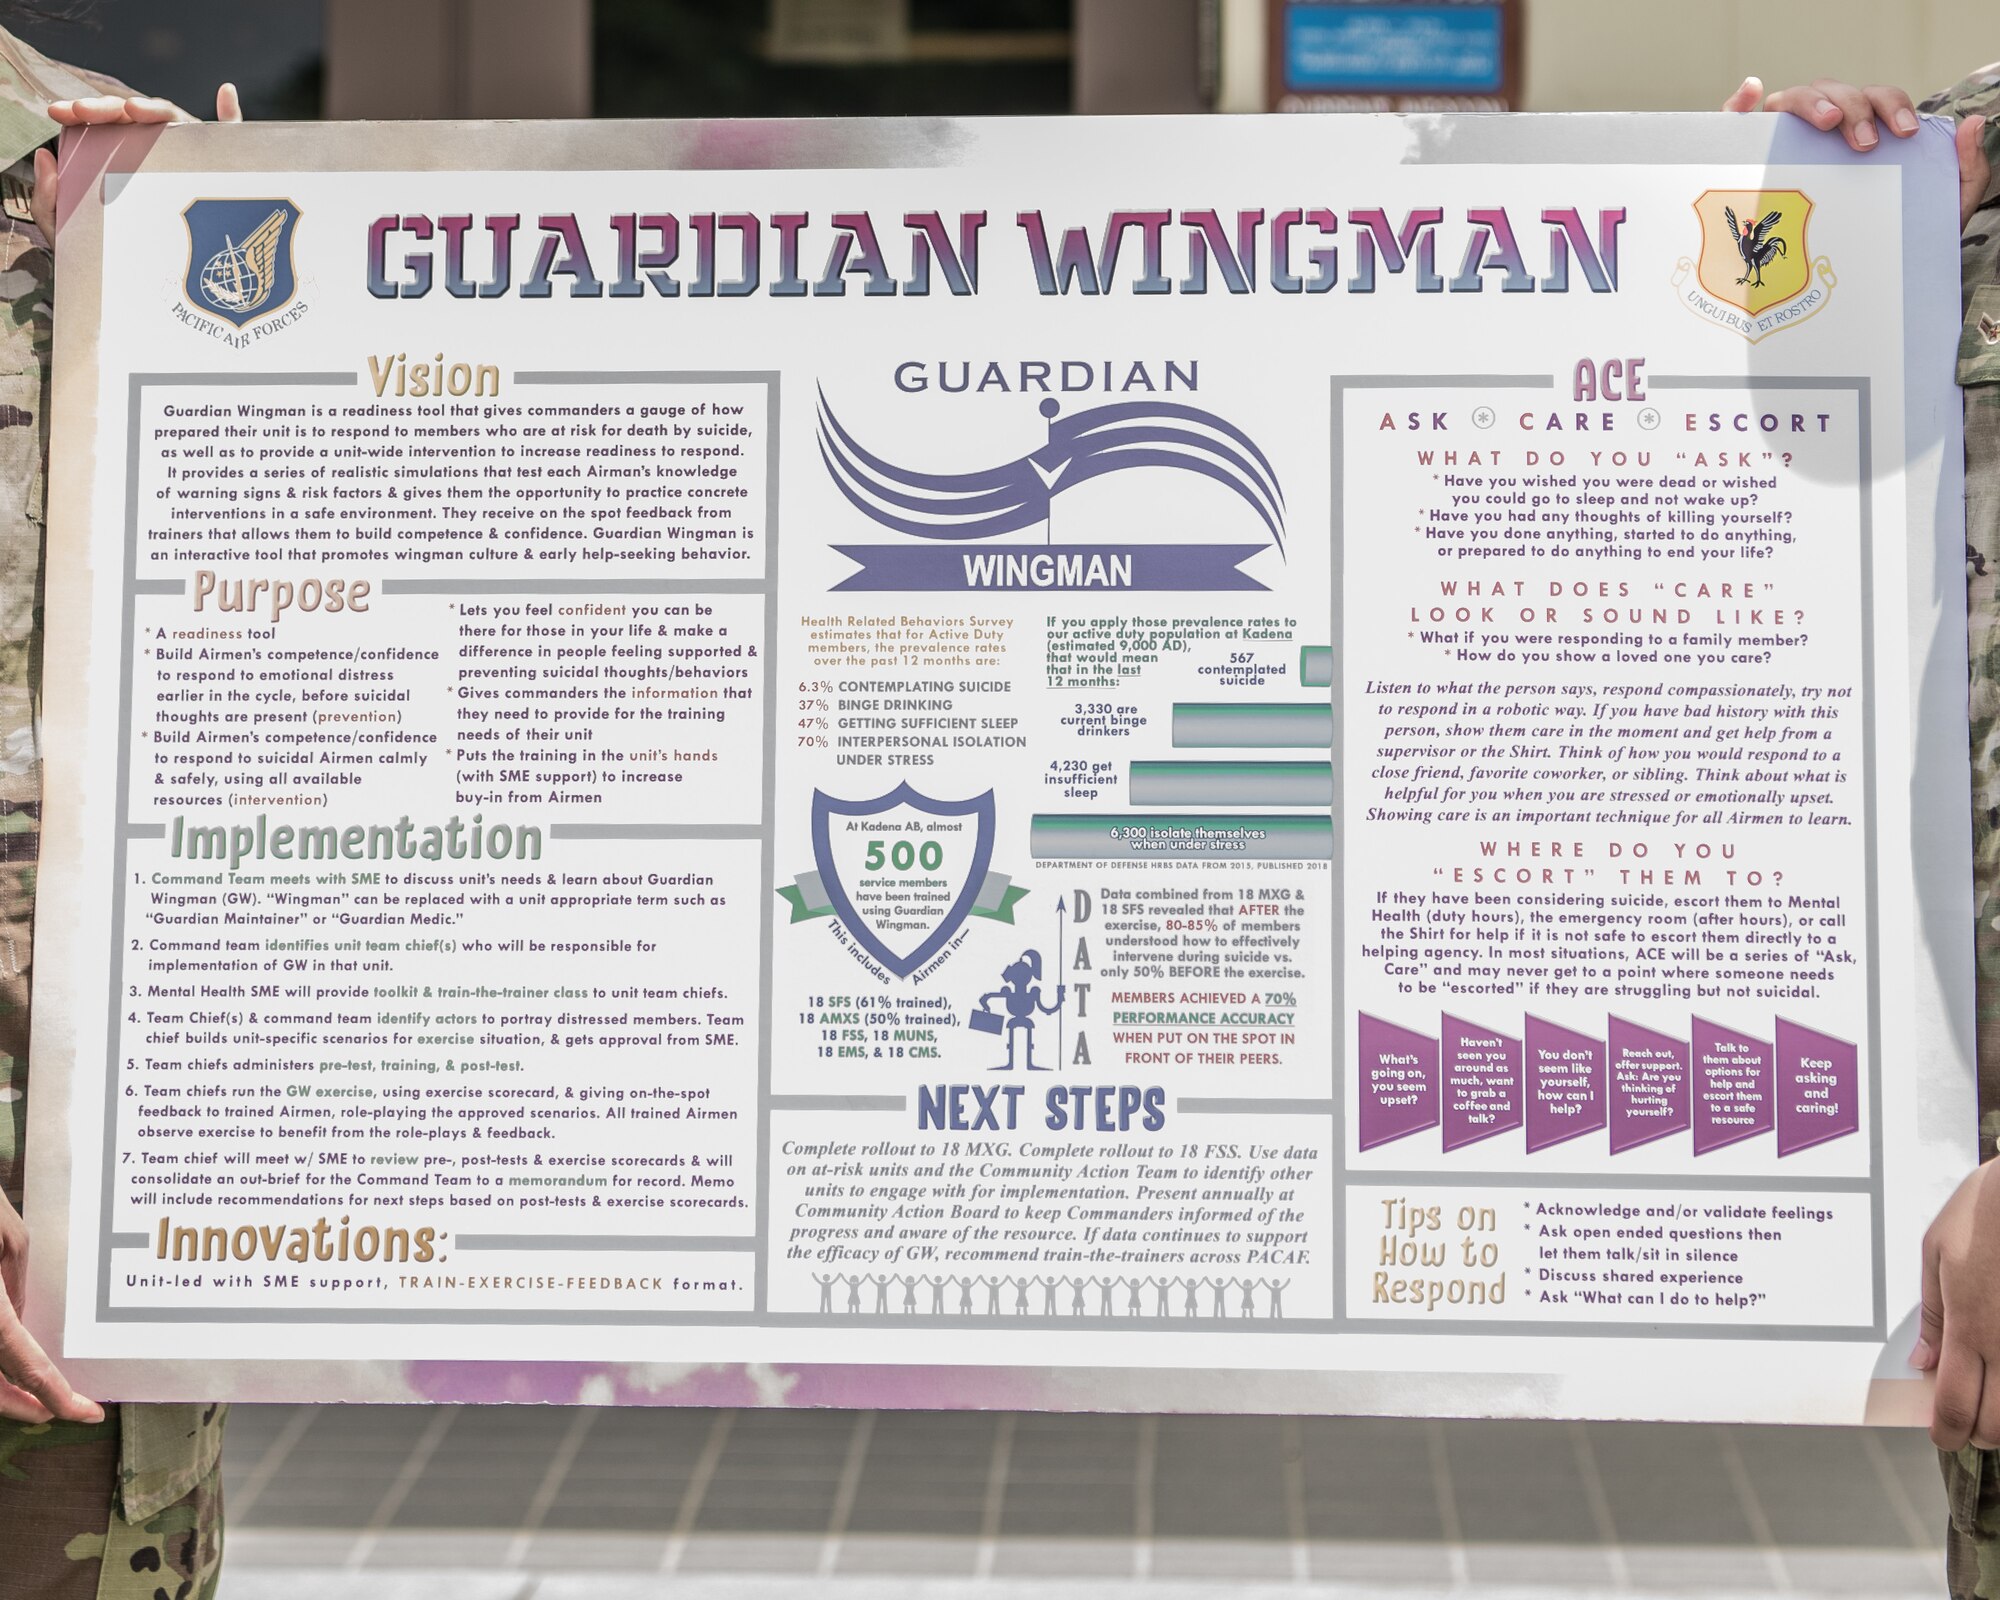 Guardian Wingman, a suicide prevention training program designed by a team at the Kadena Mental Health Clinic, aims to improve mental health management by building a community of Airmen equipped with the tools to support their fellow wingmen.